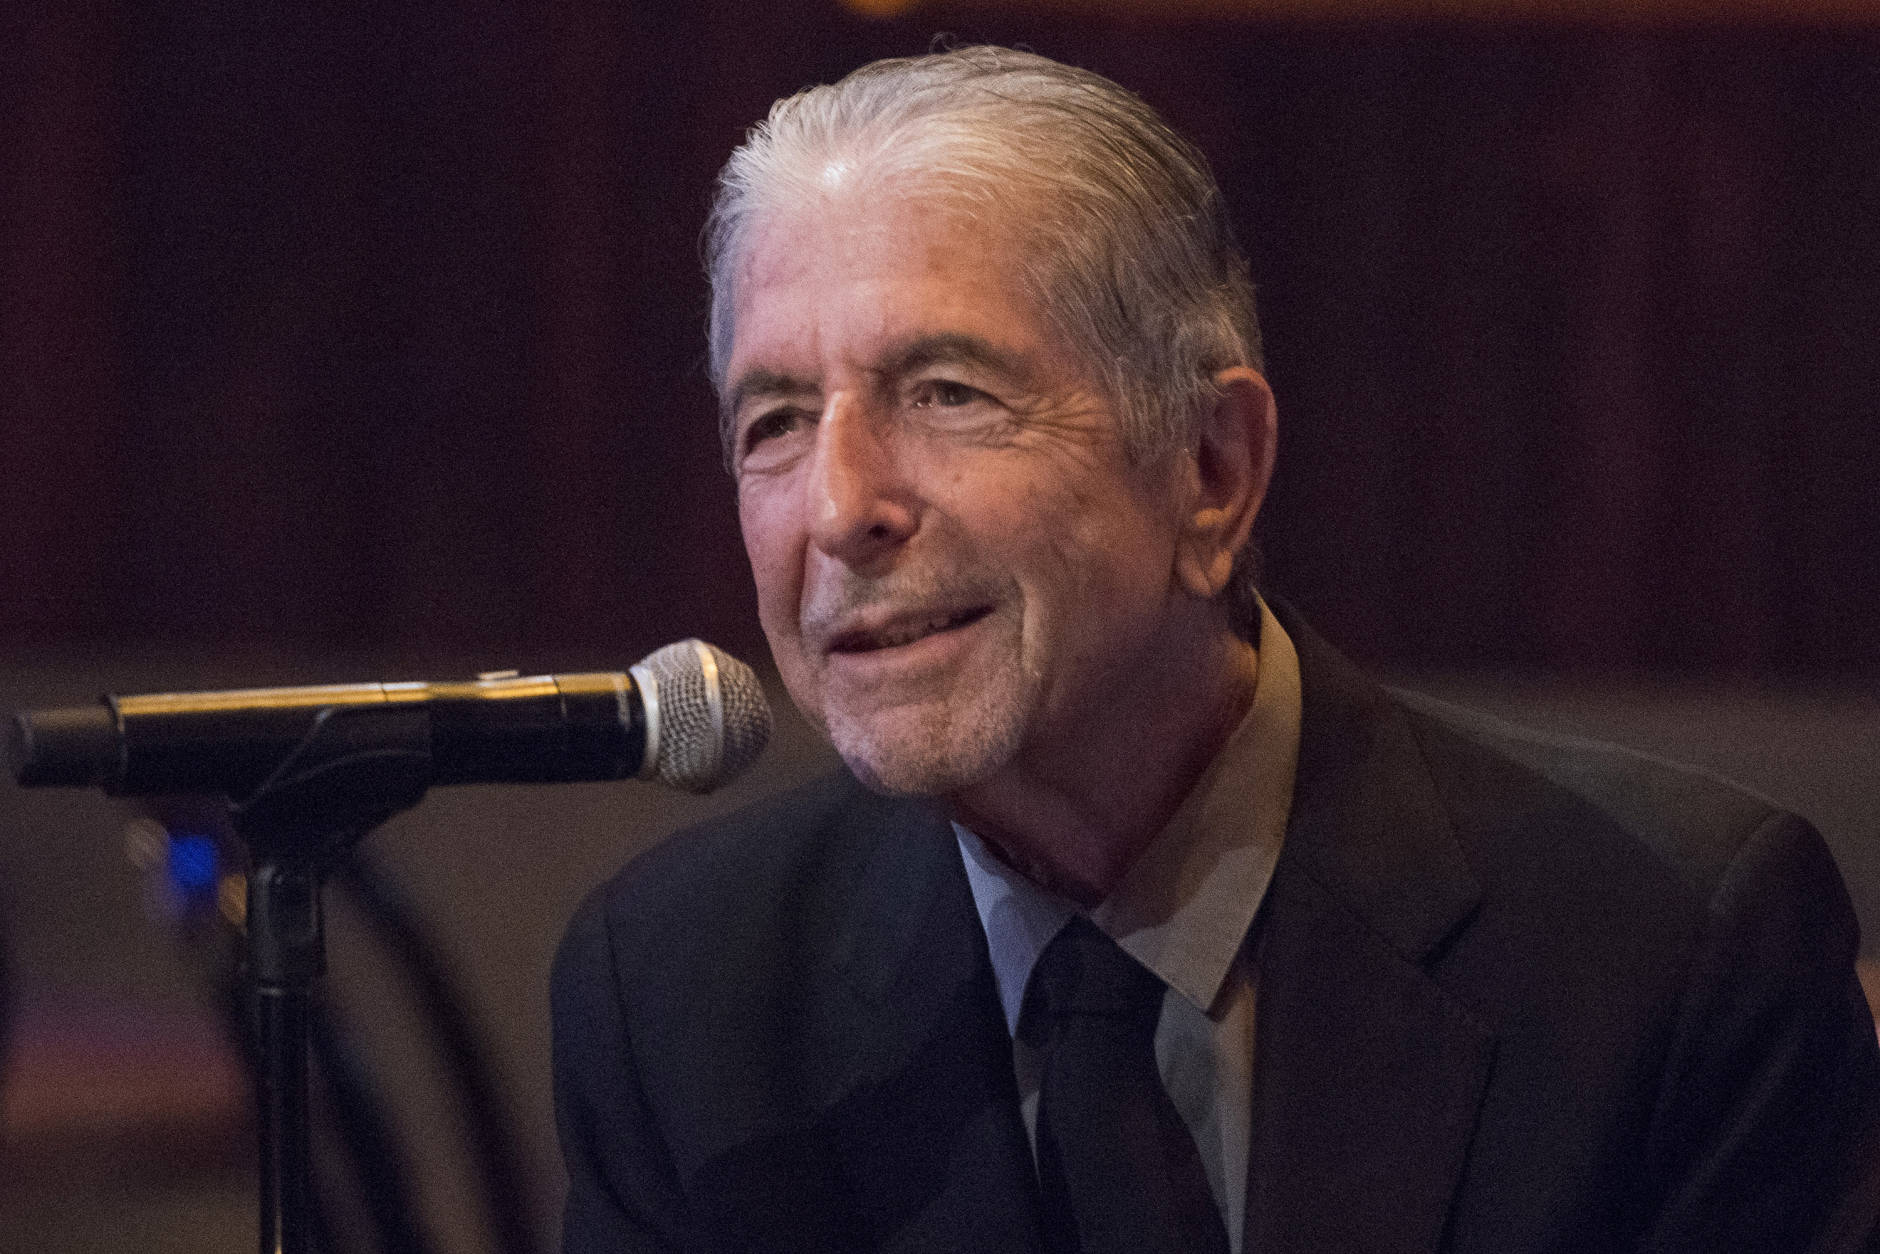 Leonard Cohen attends a listening party for his new album "Popular Problems" on Thursday, Sept 18, 2014 in New York. He died Nov. 10 at age 82. (Photo by Charles Sykes/Invision/AP)